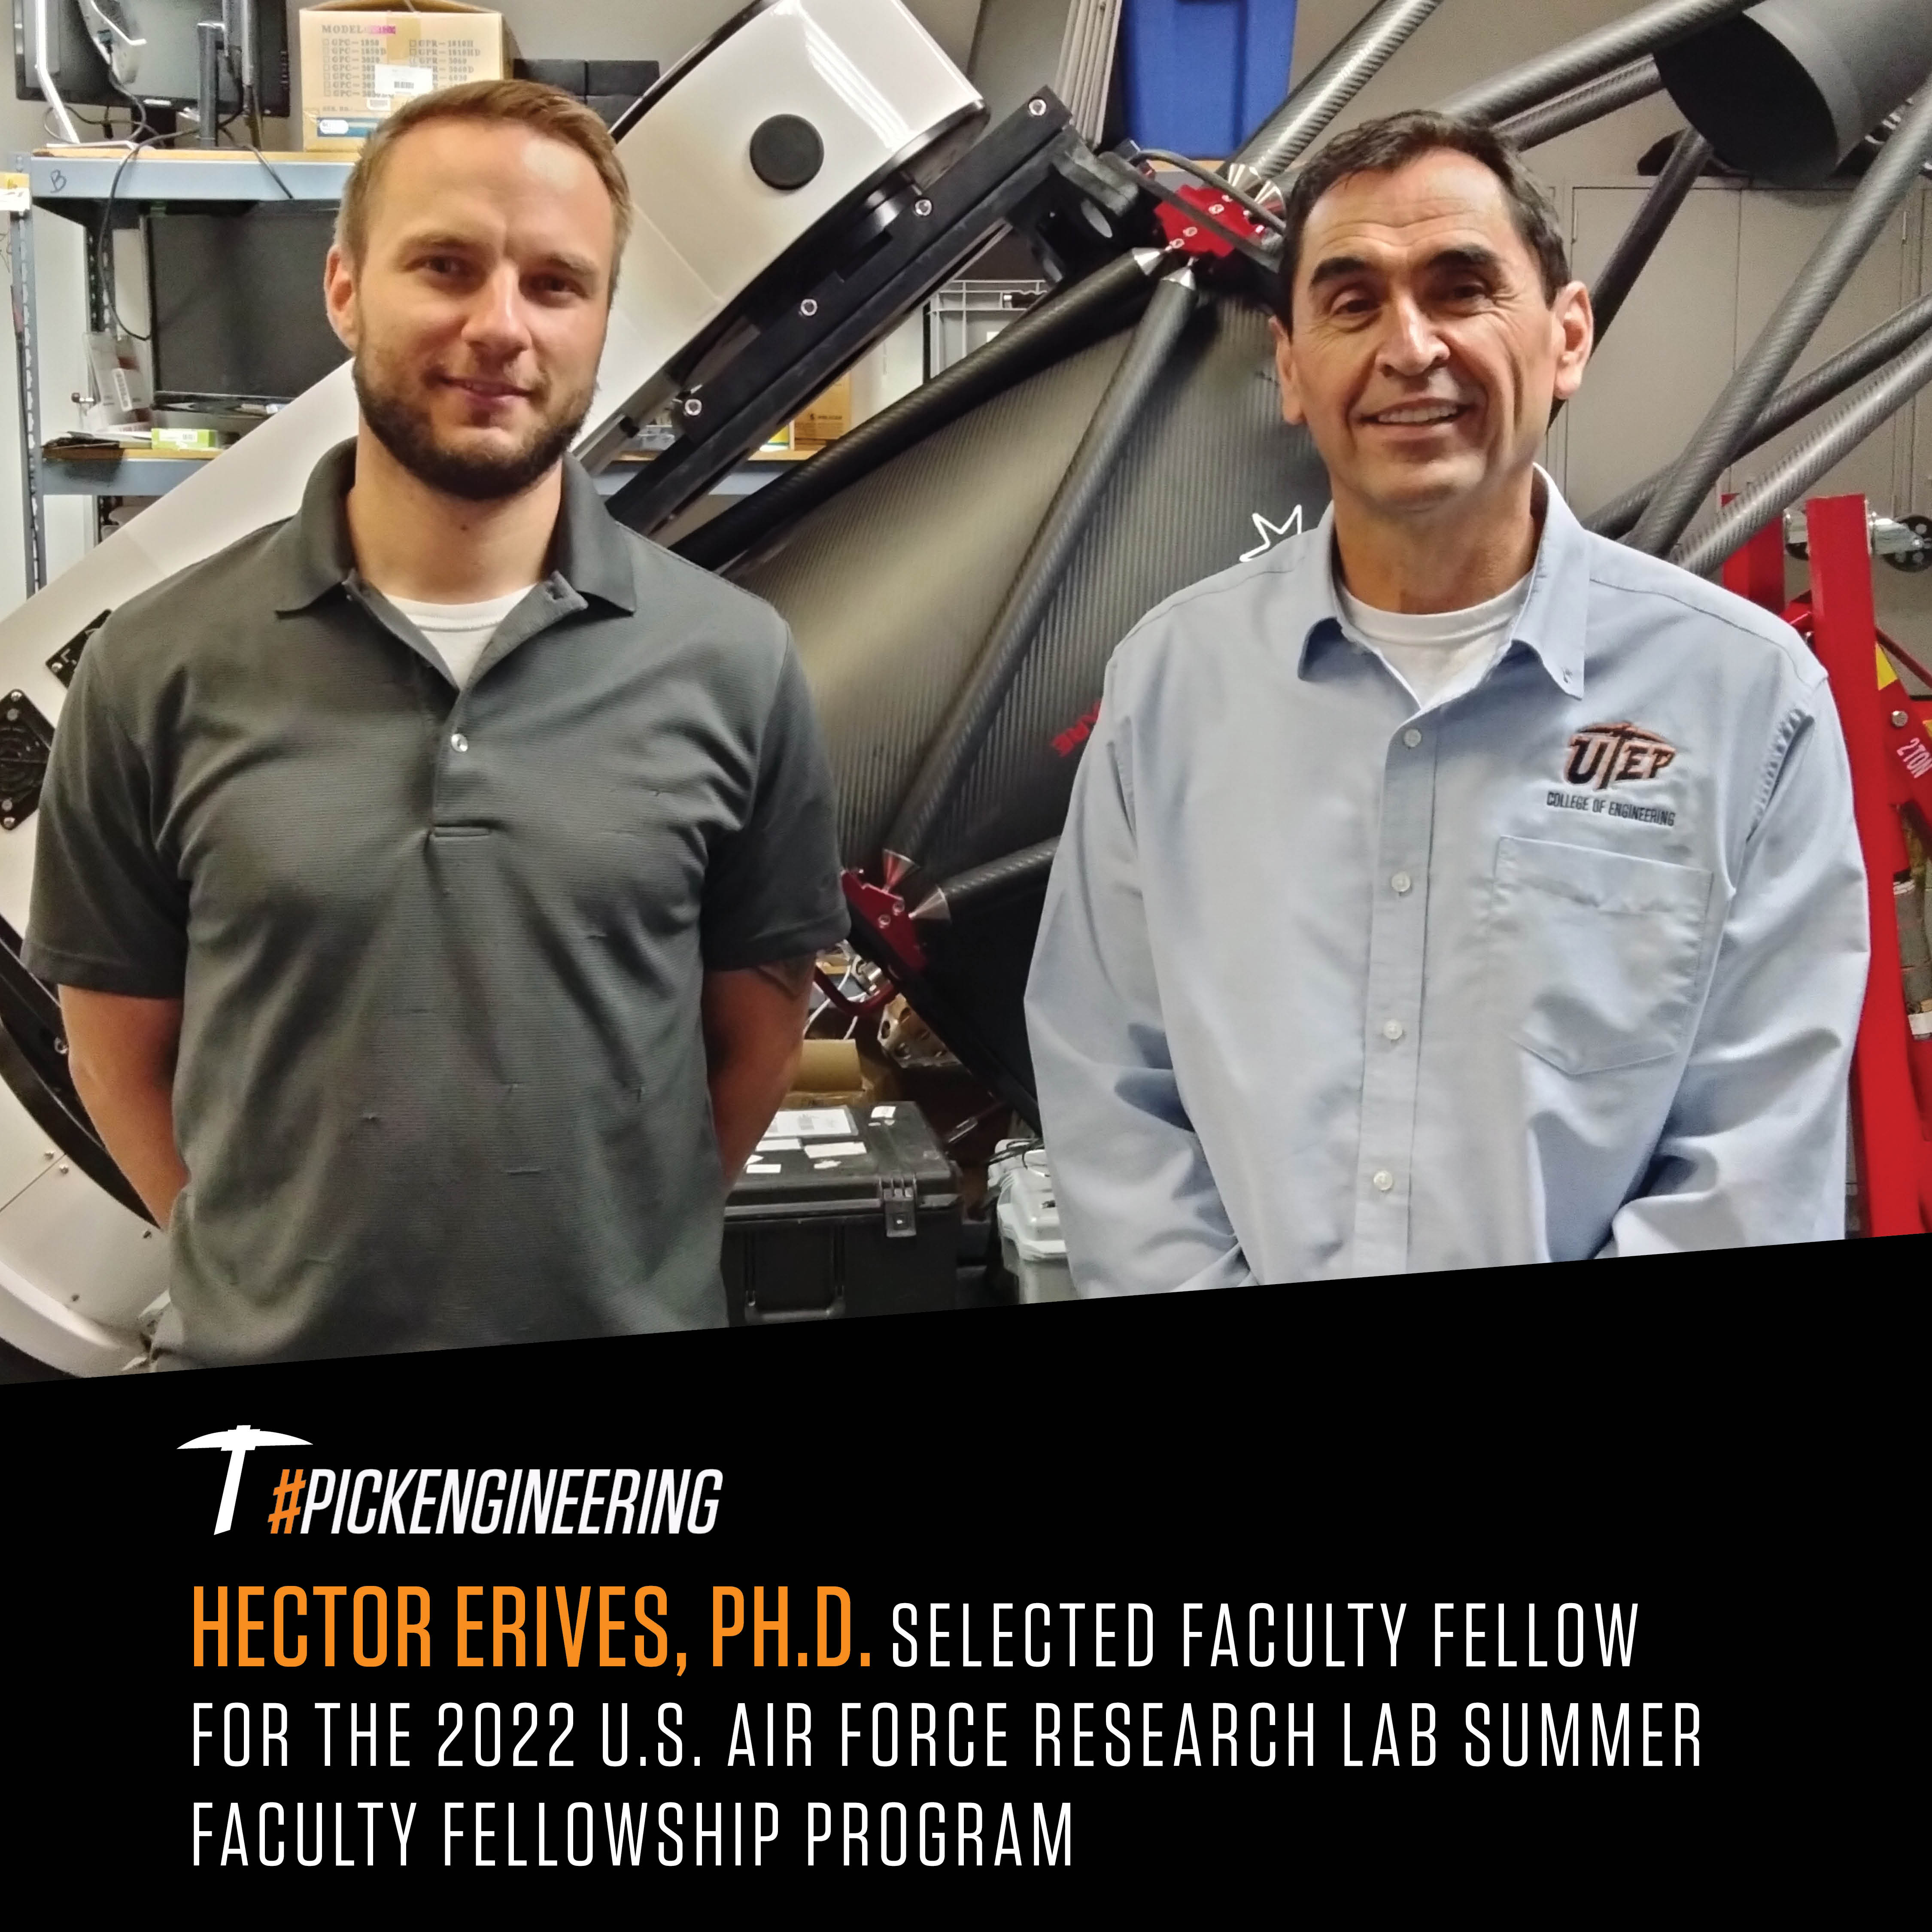 Hector Erives selected as Faculty Fellow for AFRL-SFFP